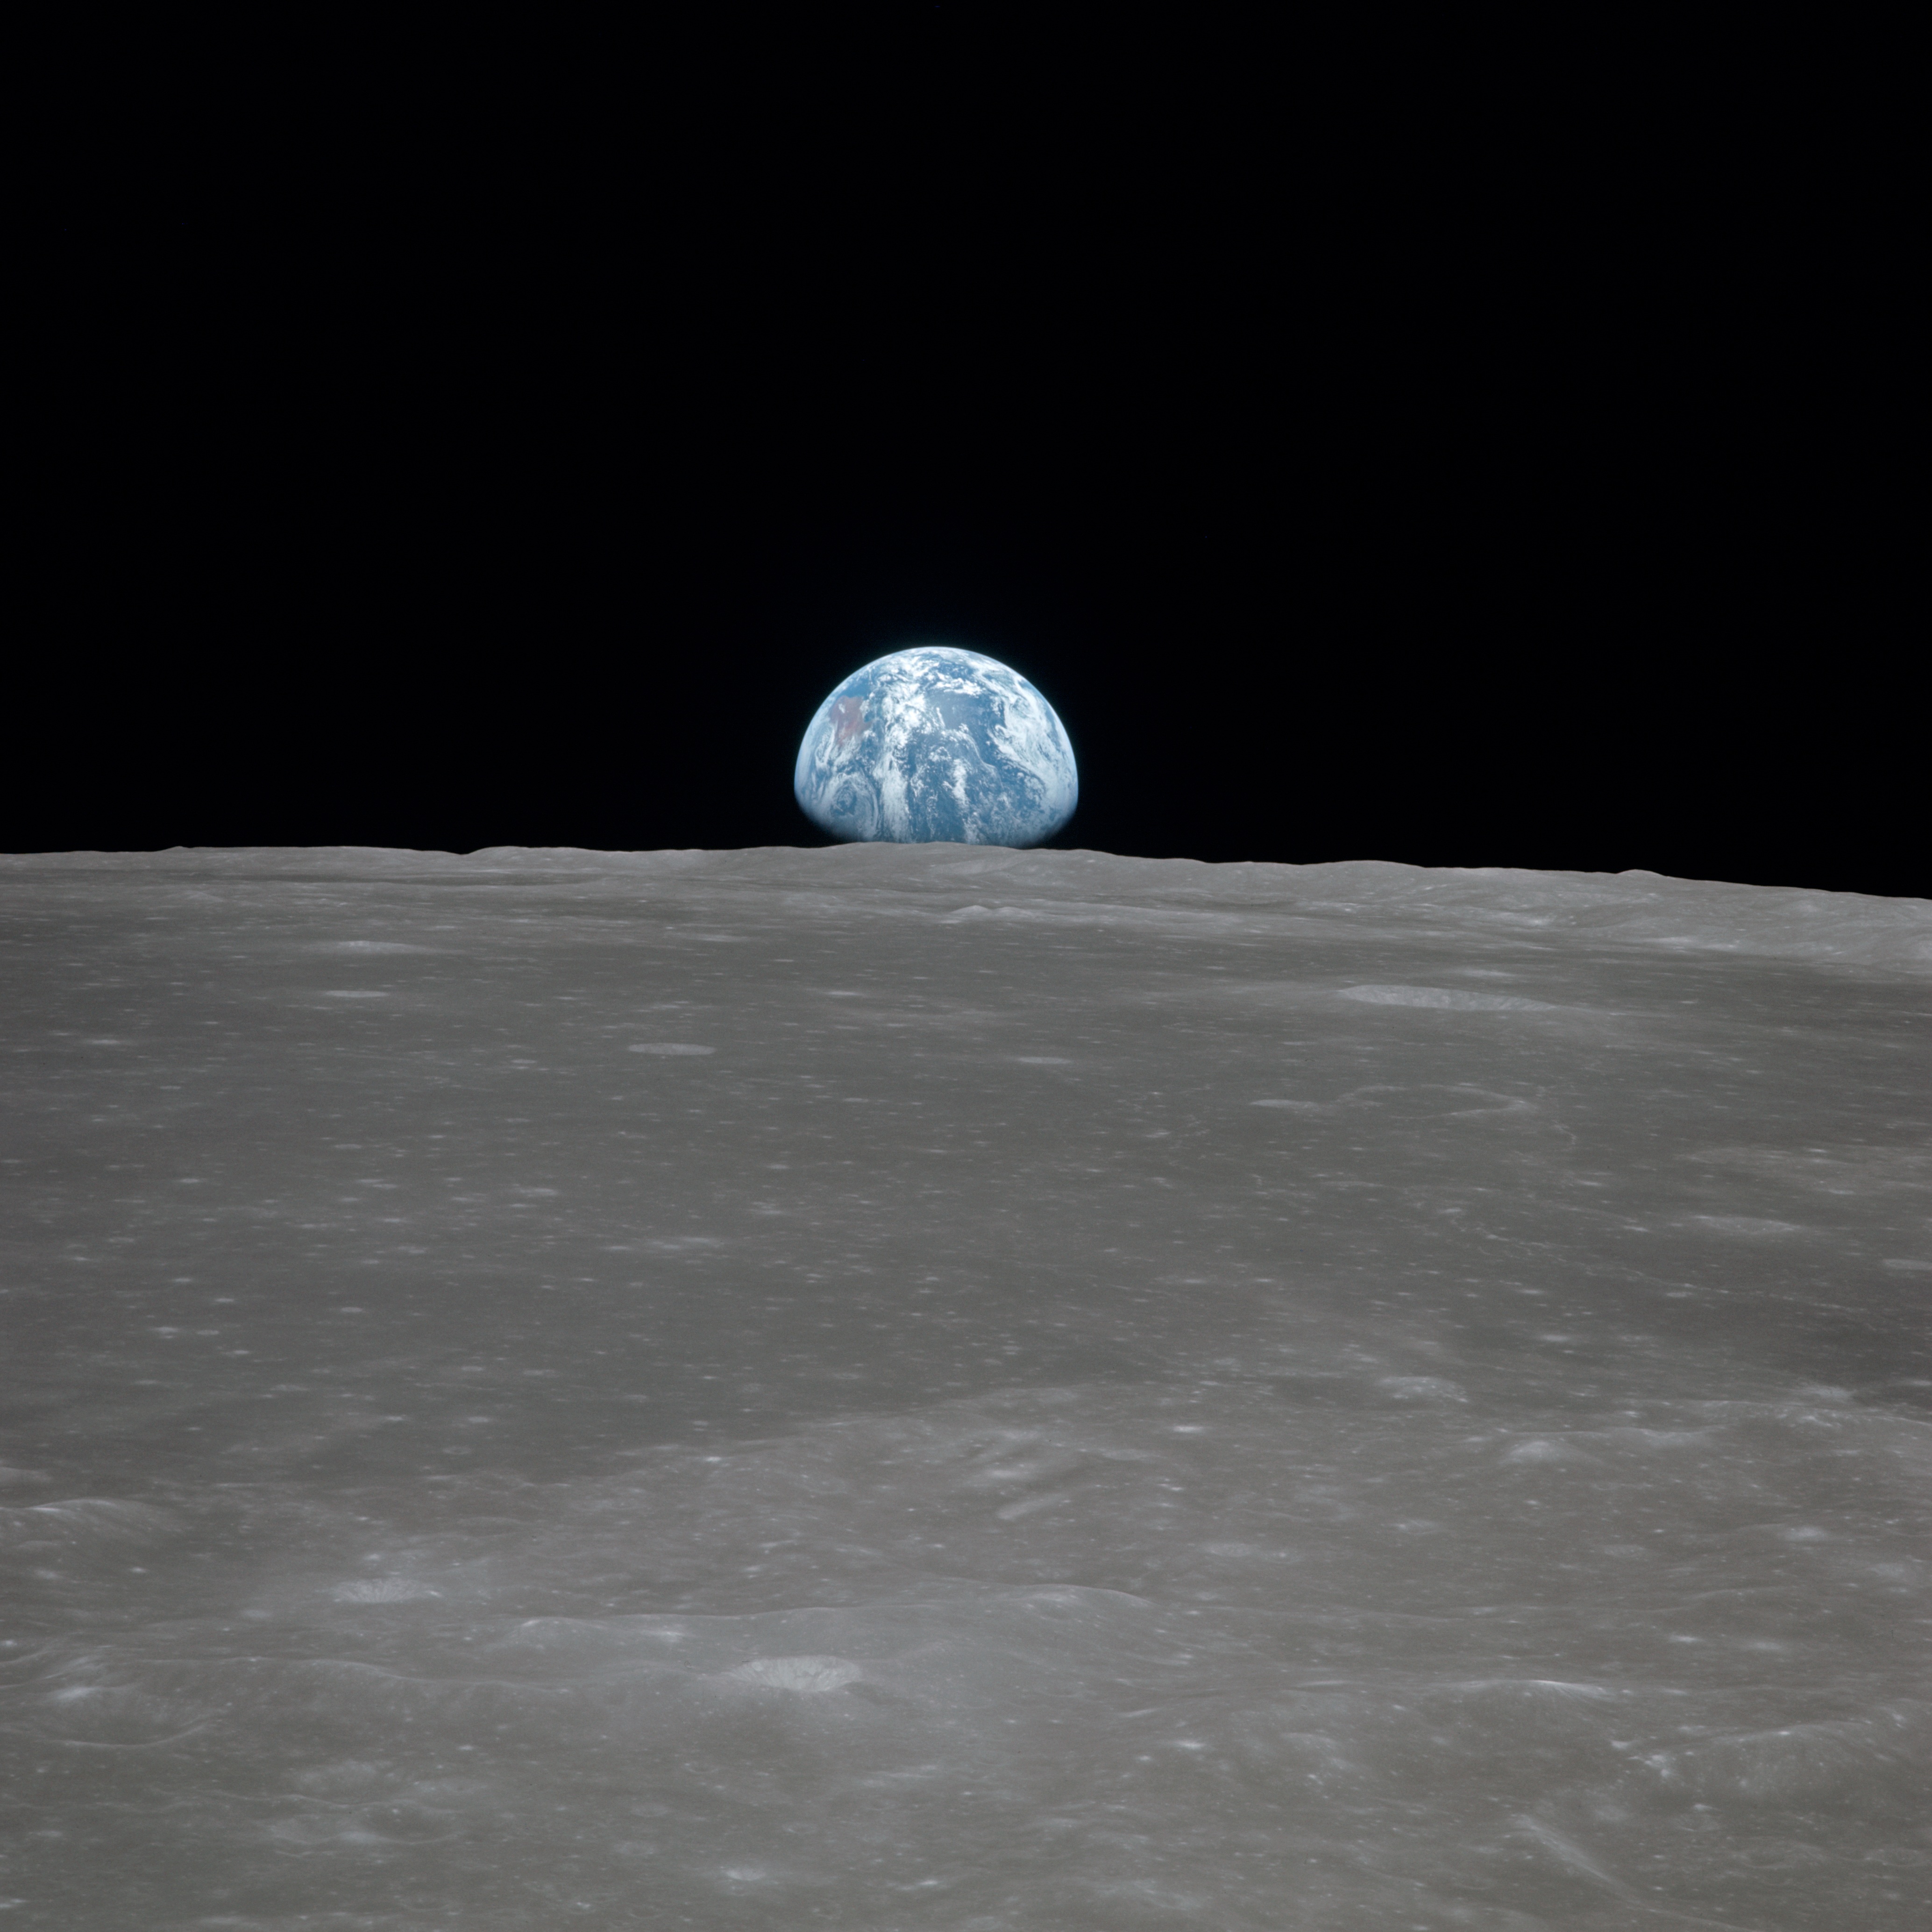 Earth from the Moon, Earth, Gravity, Life, Lunar, HQ Photo